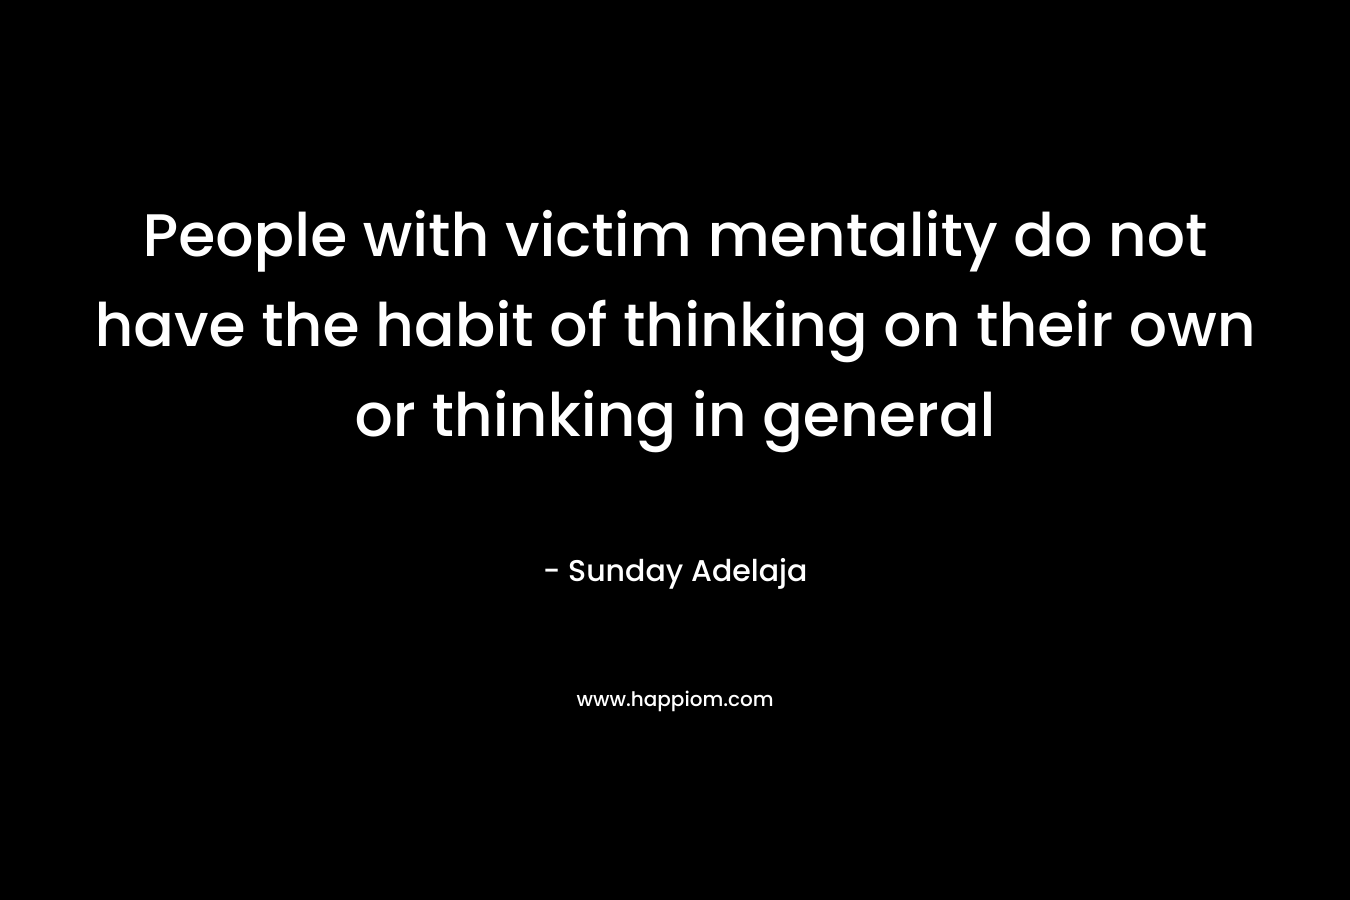 People with victim mentality do not have the habit of thinking on their own or thinking in general